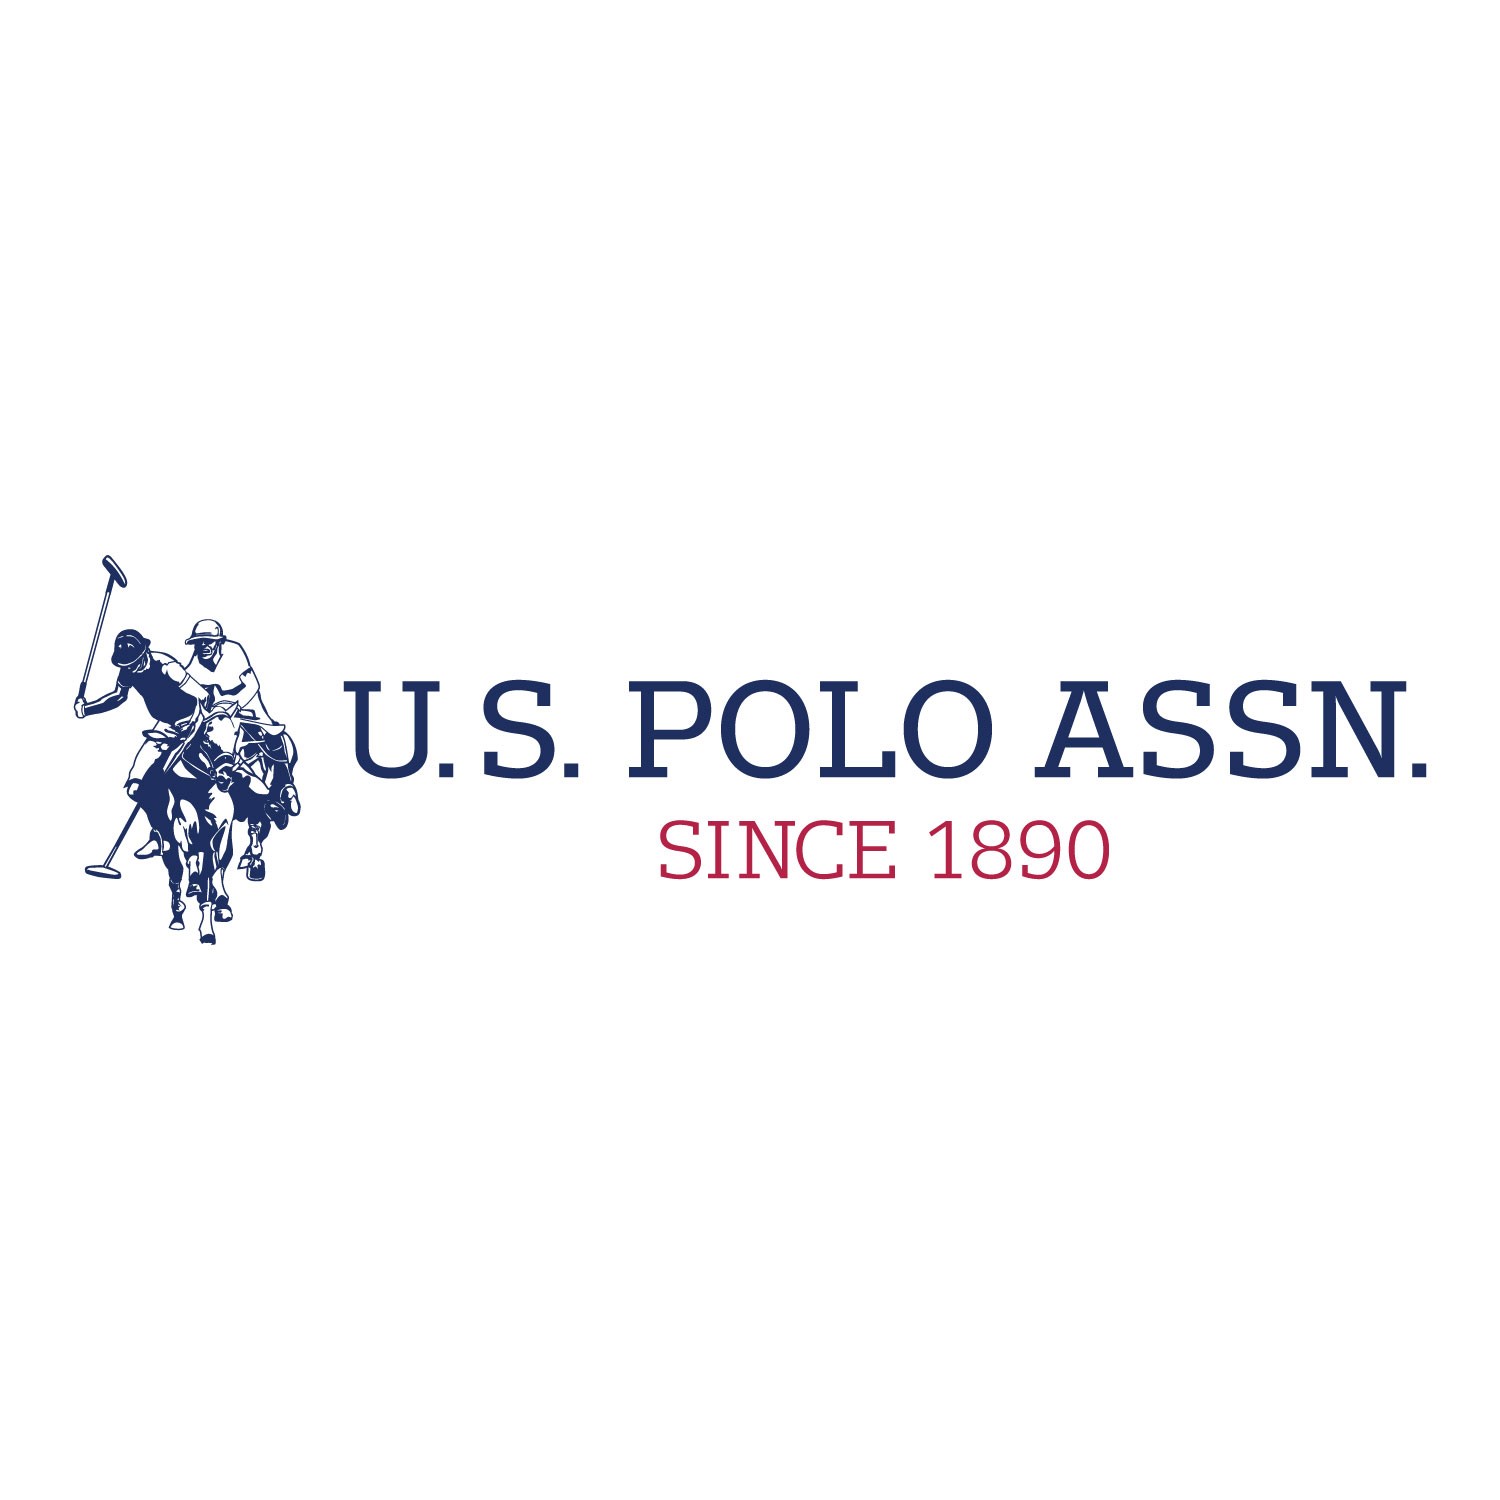 U.S. Polo Assn. Launches All-new #PlayTogether Campaign Starring Arjun ...